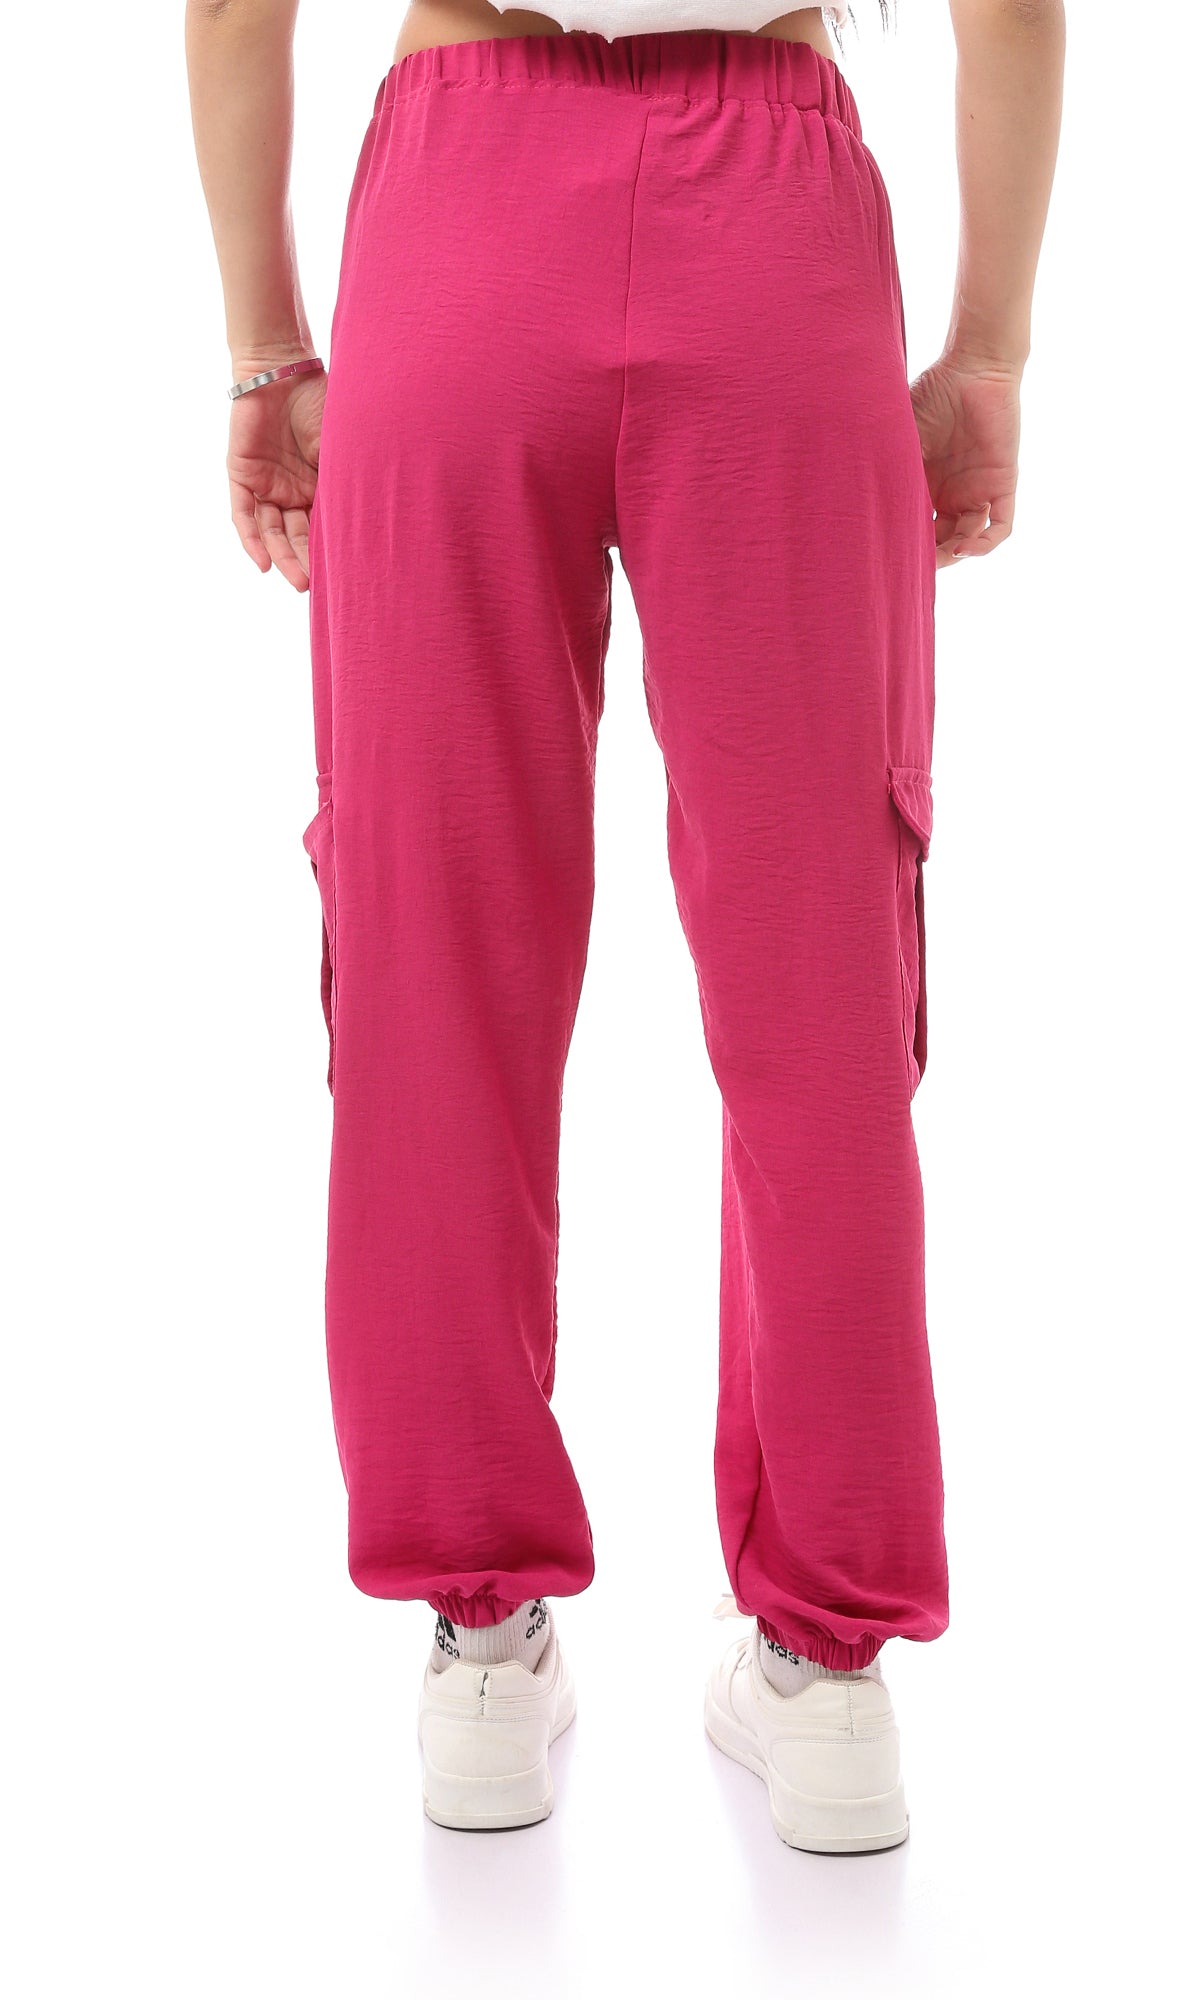 O170598 Slip On Purple Comfy Solid Trousers With Side Pockets